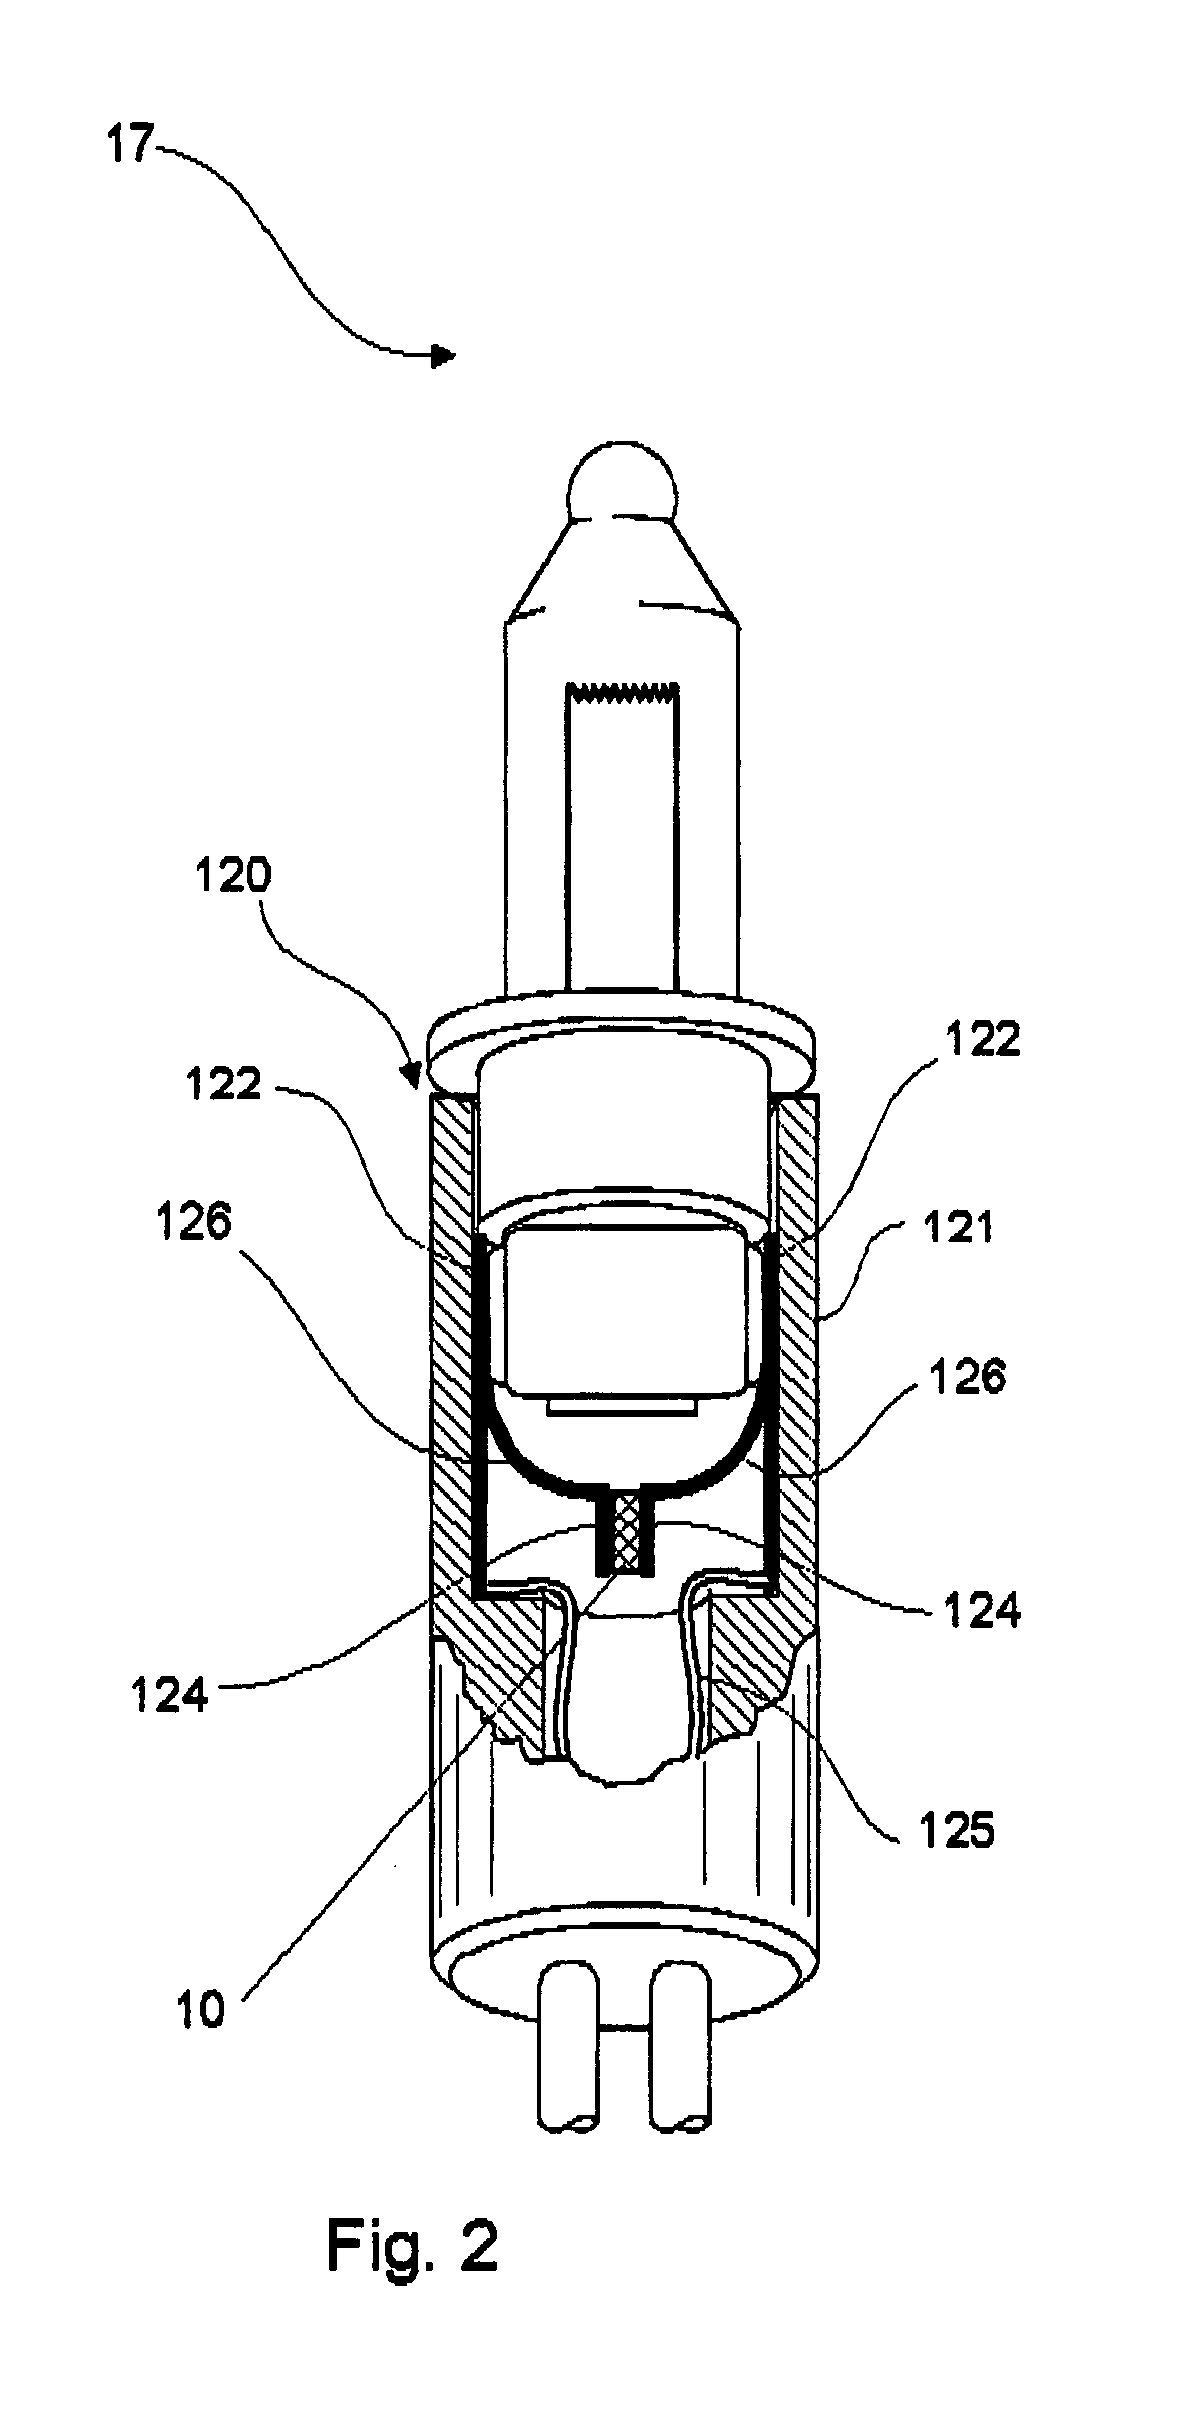 Semiconductor chip and conductive member for use in a light socket